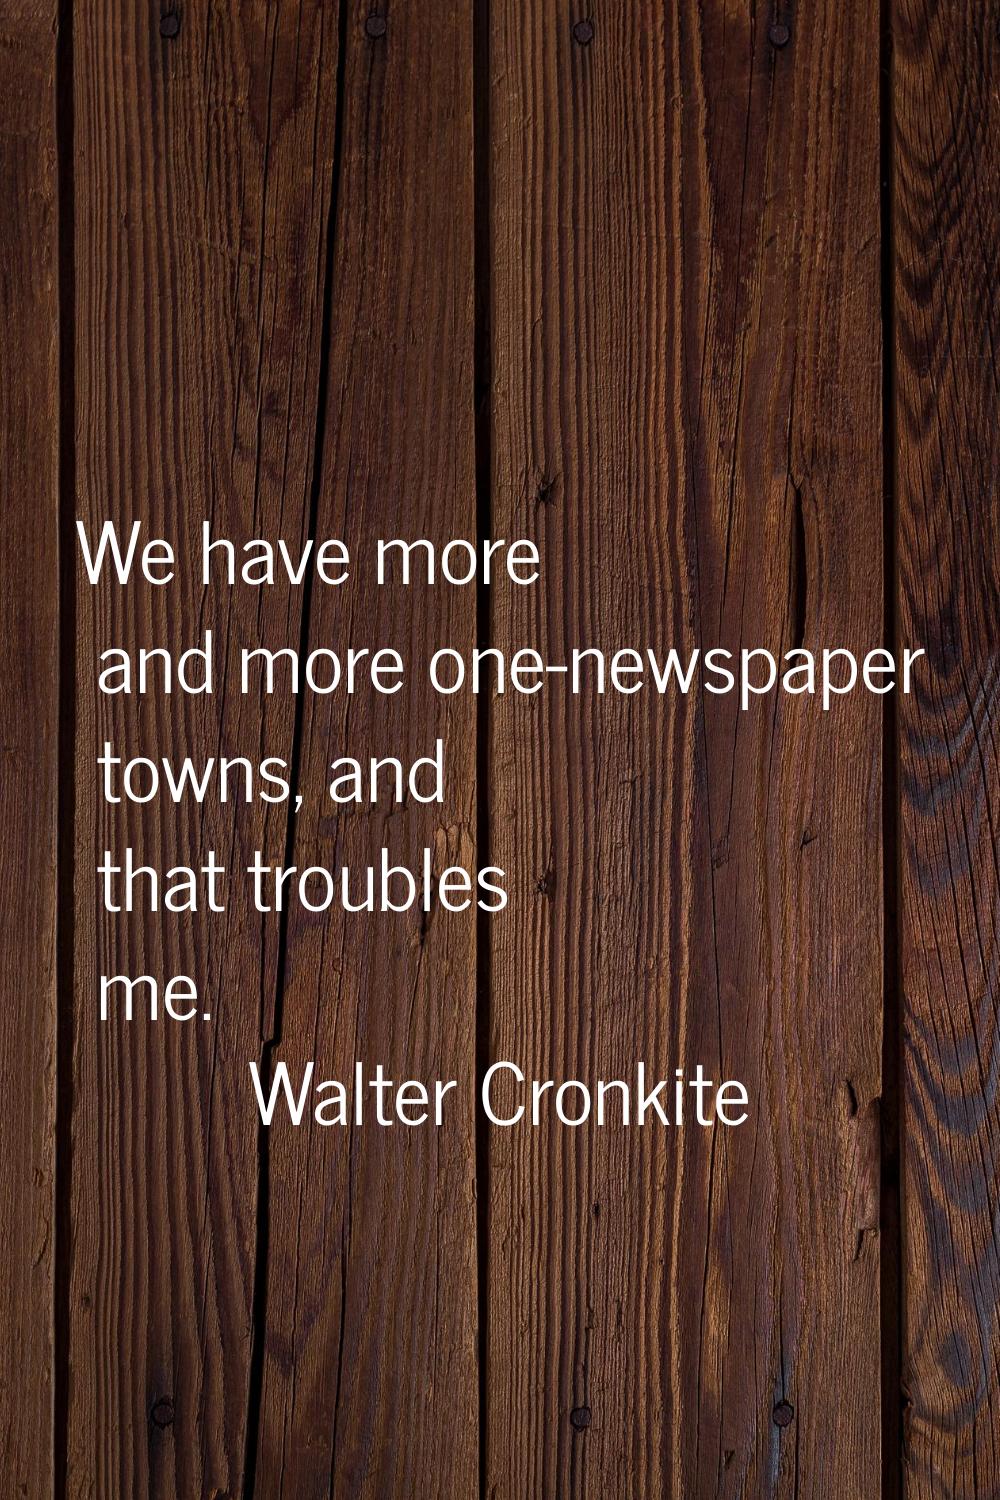 We have more and more one-newspaper towns, and that troubles me.